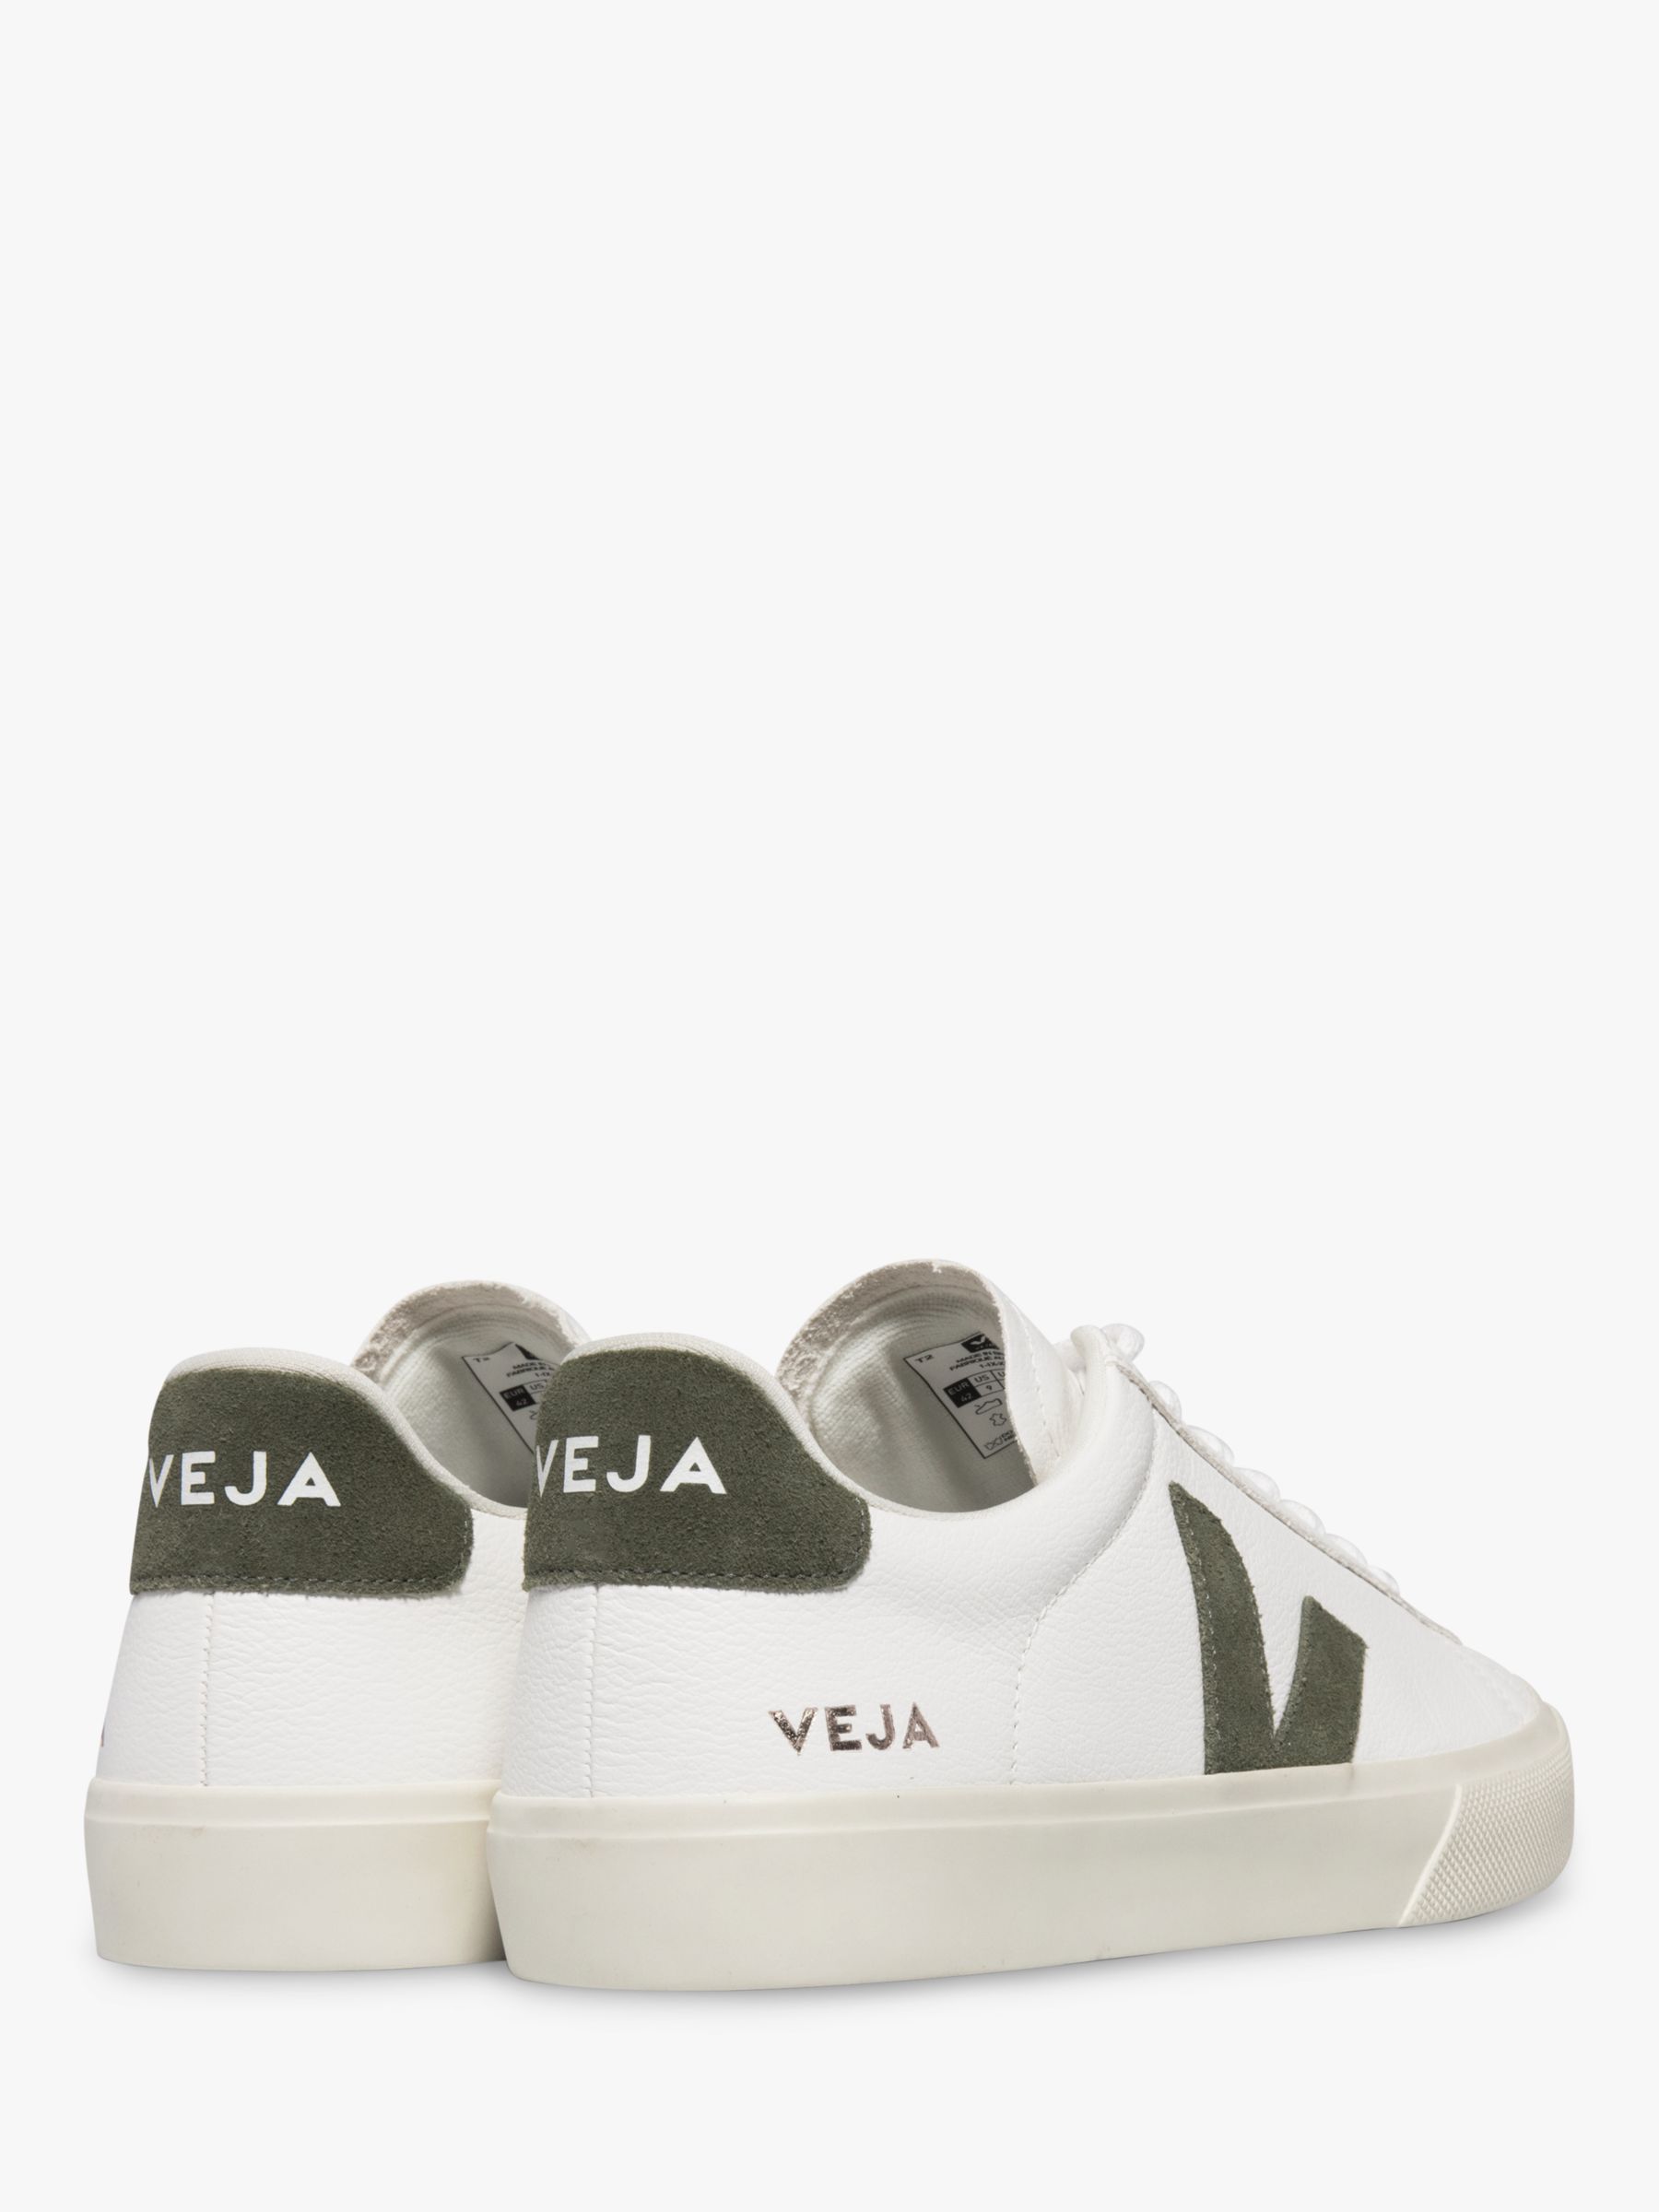 Buy VEJA Campo Leather Trainers Online at johnlewis.com